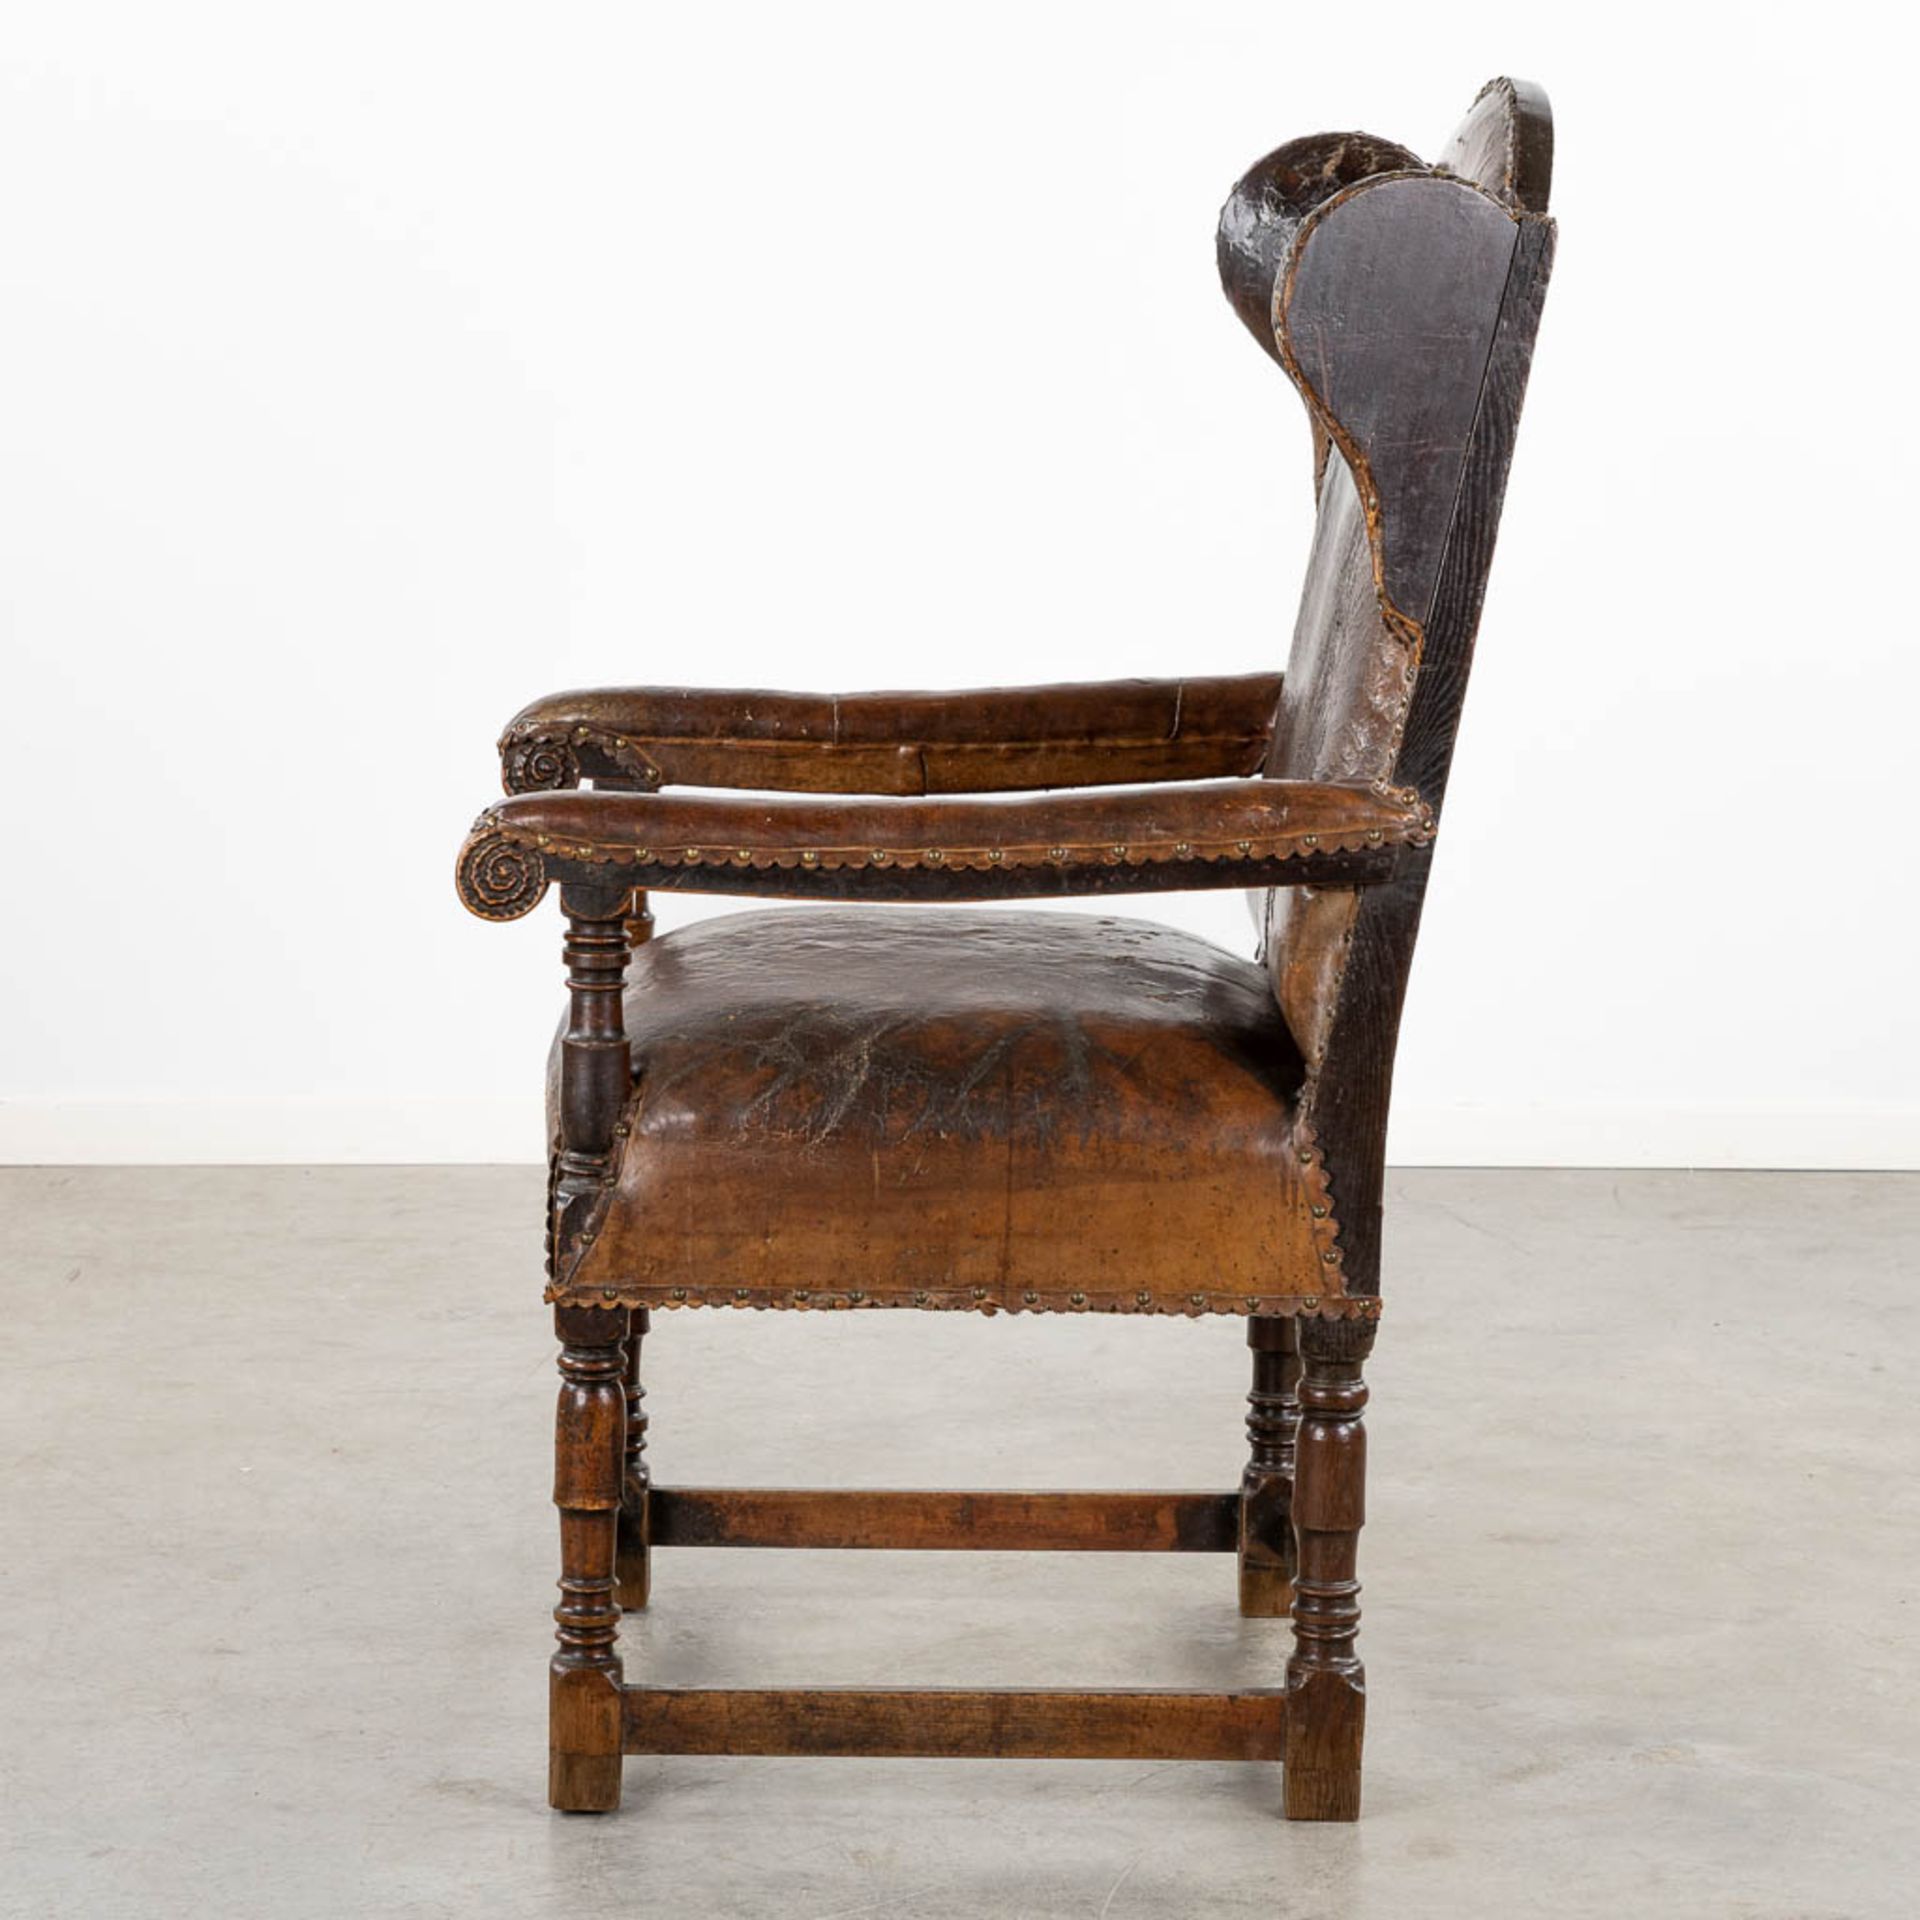 An antique Throne chair, leather on wood, great patina. 18th C. (L:76 x W:67 x H:125 cm) - Bild 4 aus 13